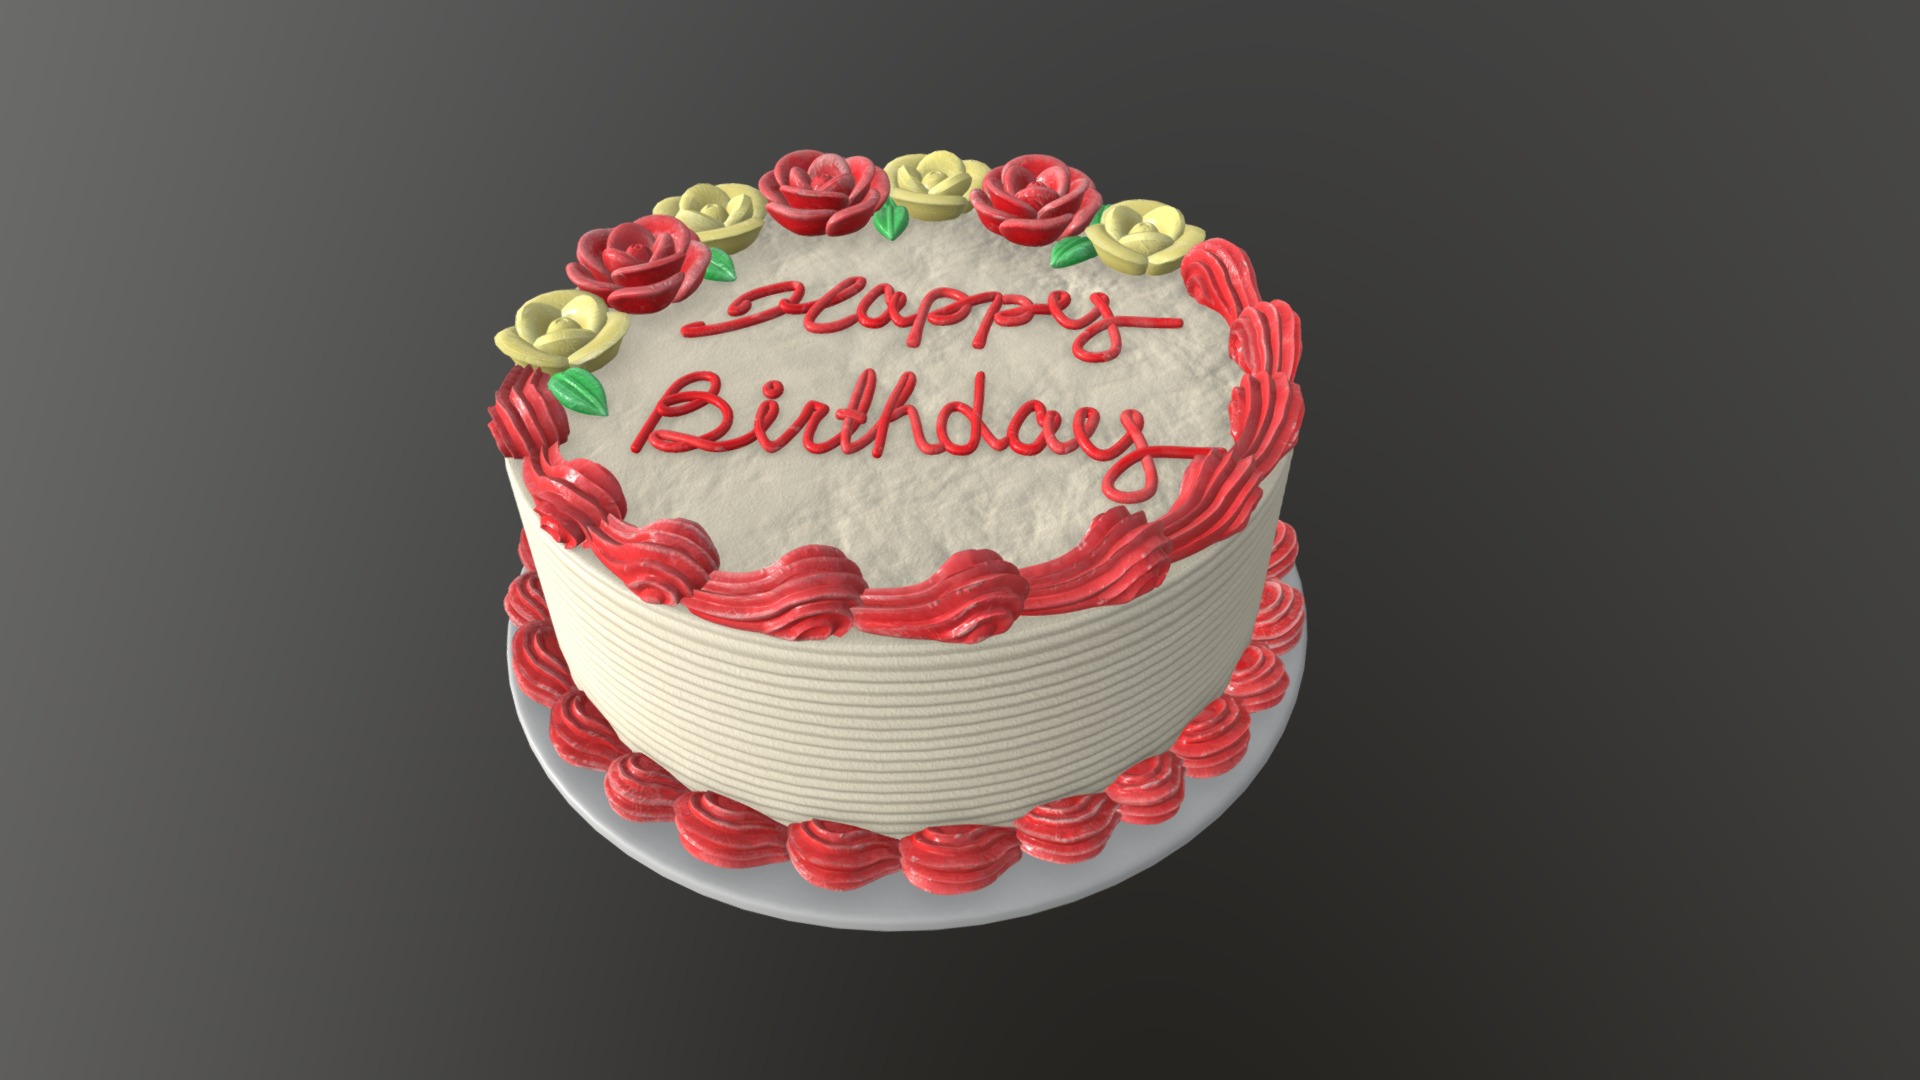 3D model birthday cake with roses - This is a 3D model of the birthday cake with roses. The 3D model is about a cake with a red and white frosting and a red ribbon.